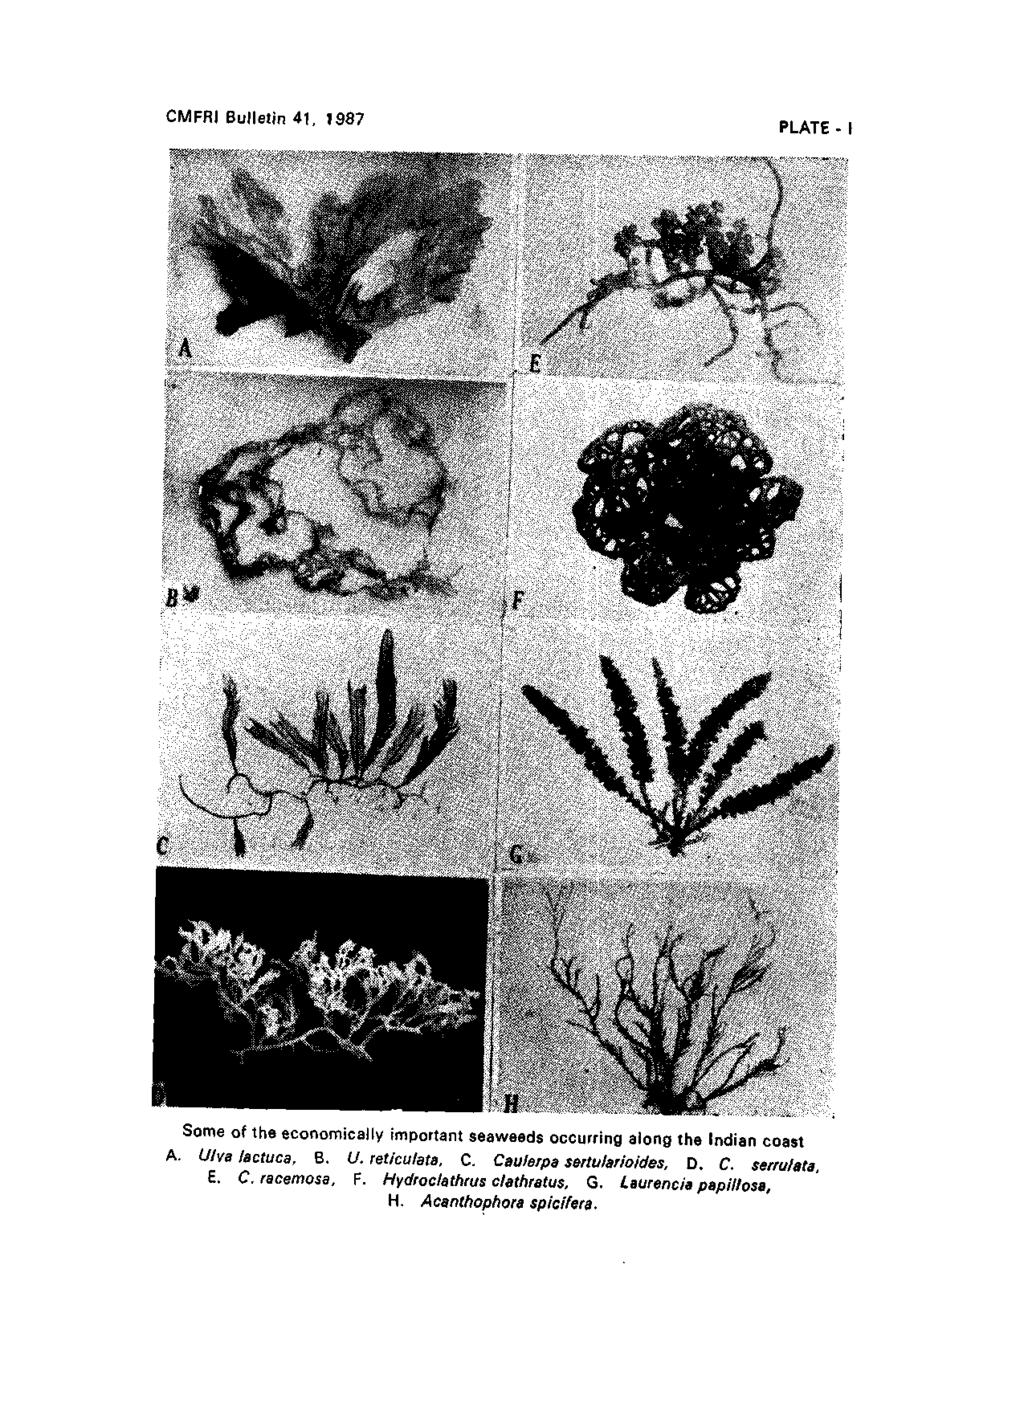 CMFRI Bulletin 41, 1987 PLATE - I Some of the economically important seaweeds occurring along the Indian coast A. Ulva lactuca, B. U. reticulata.